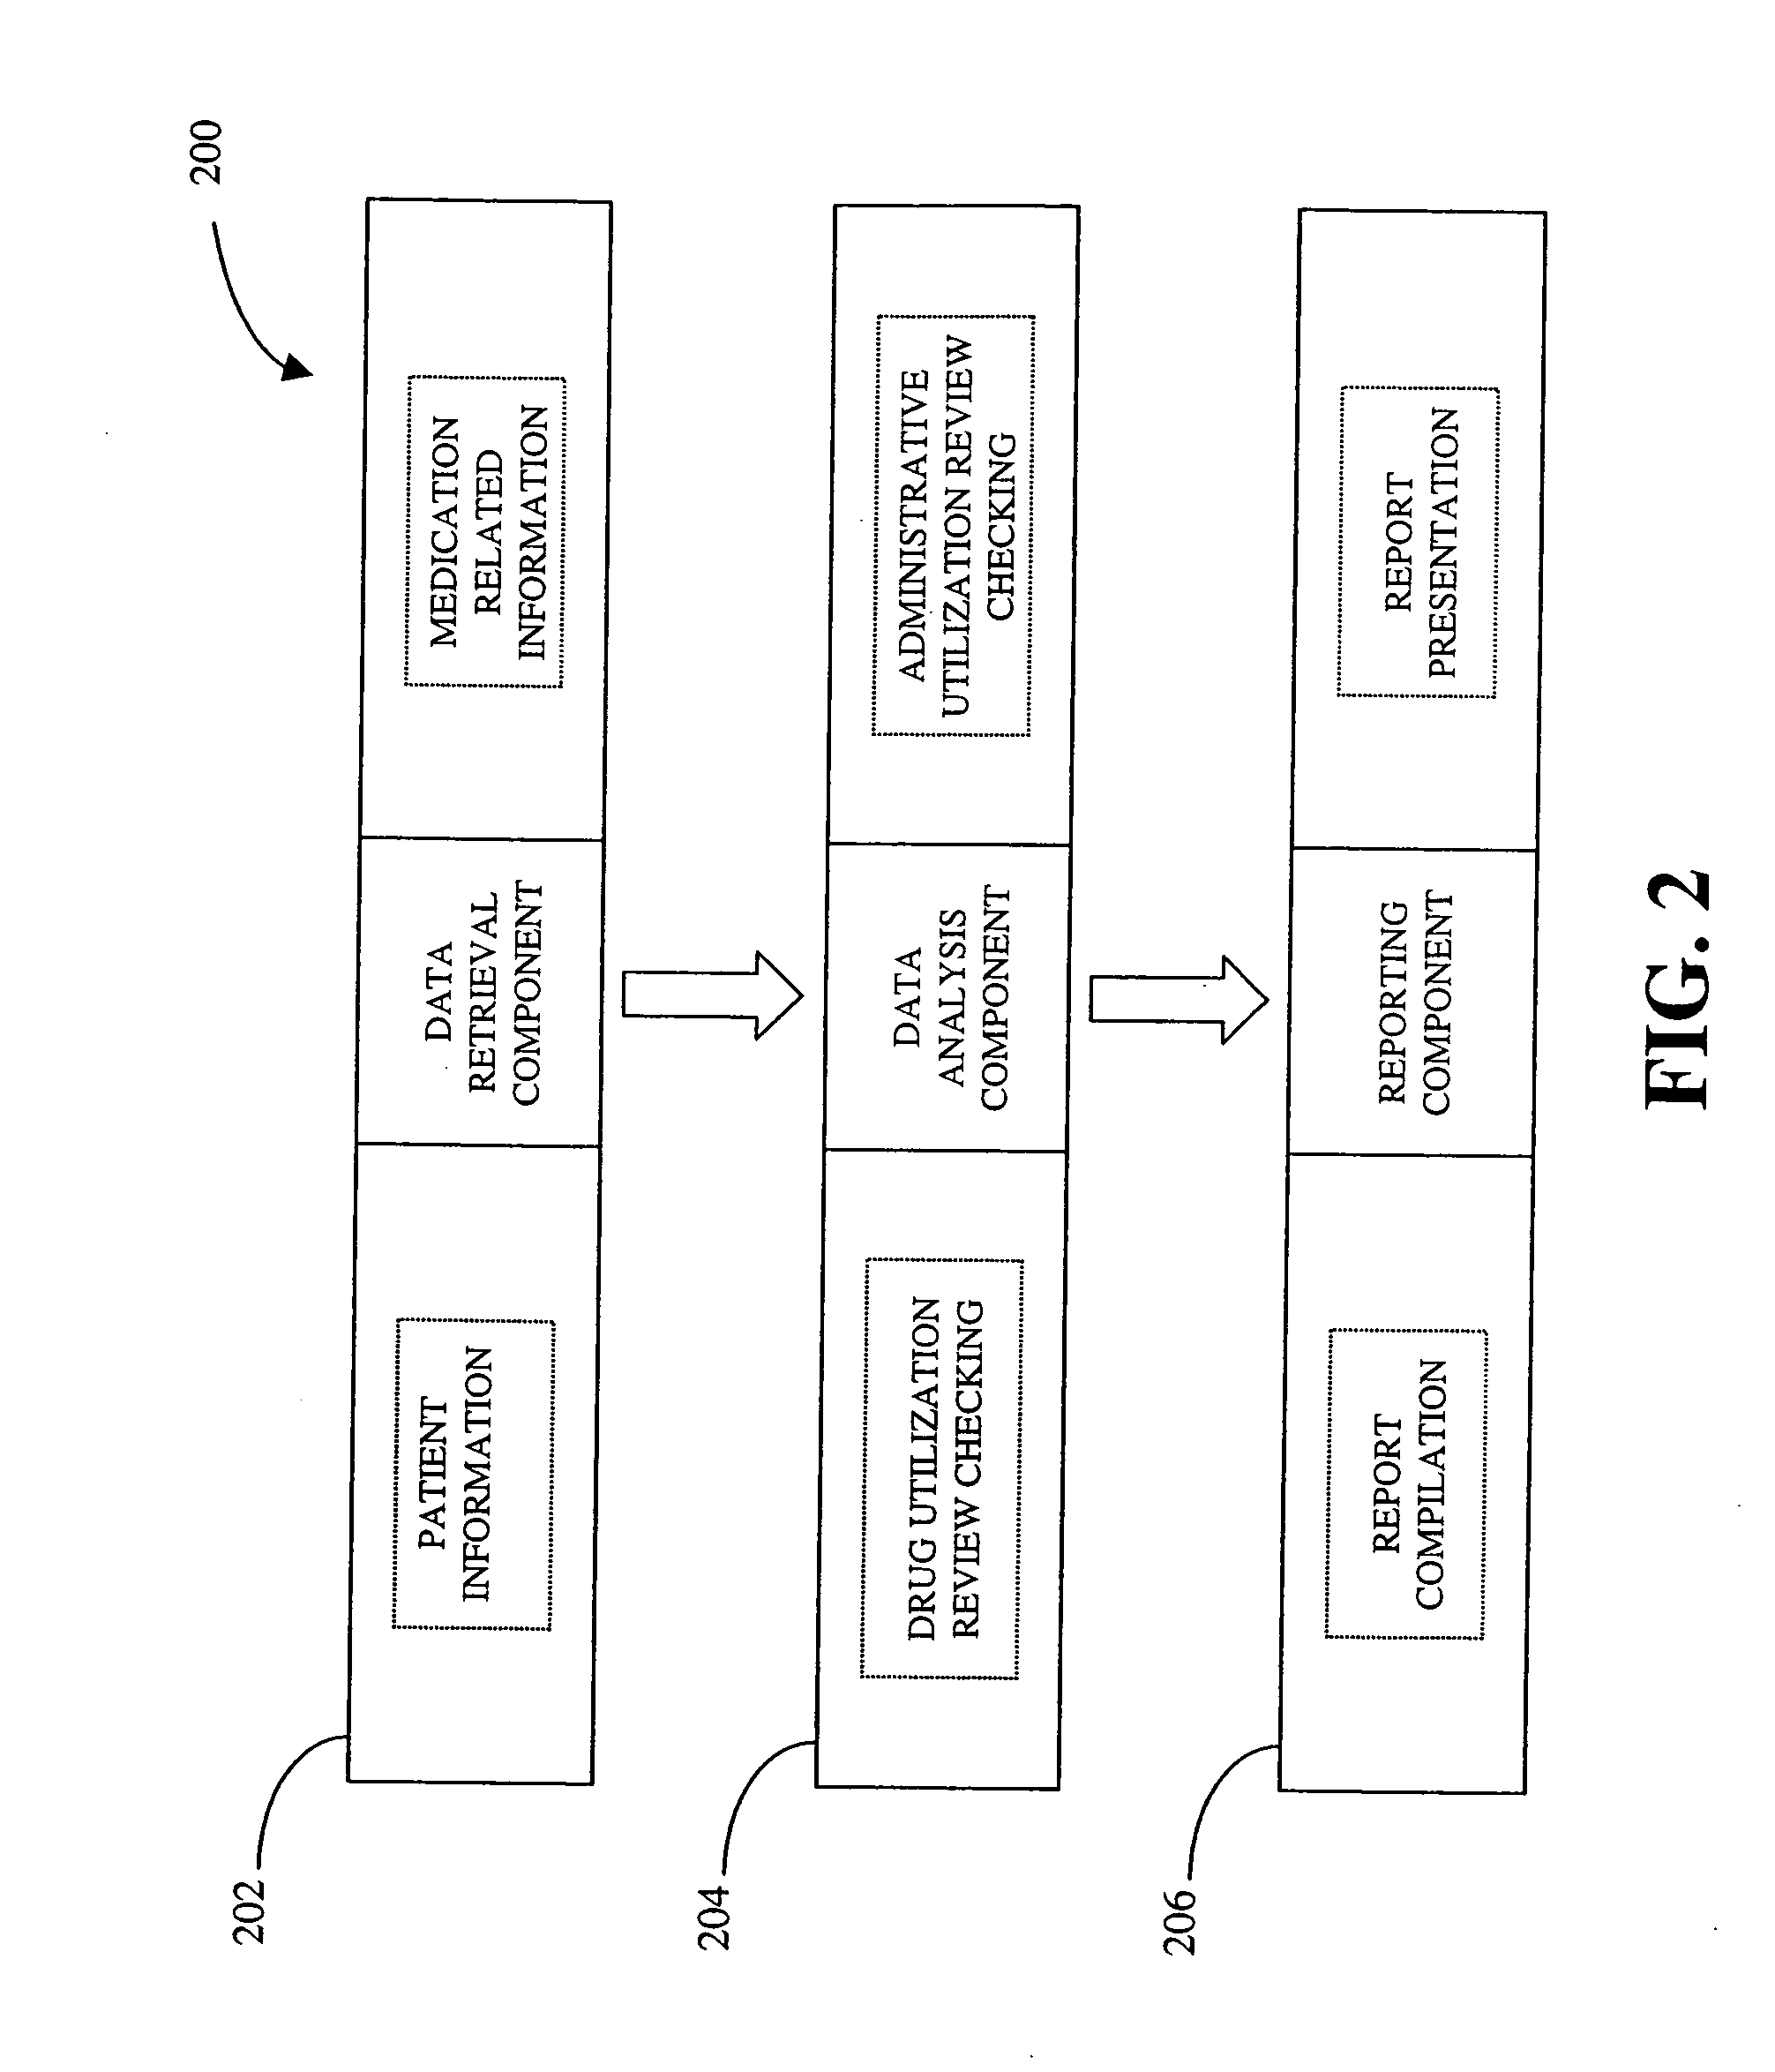 System and methods for providing medication selection guidance